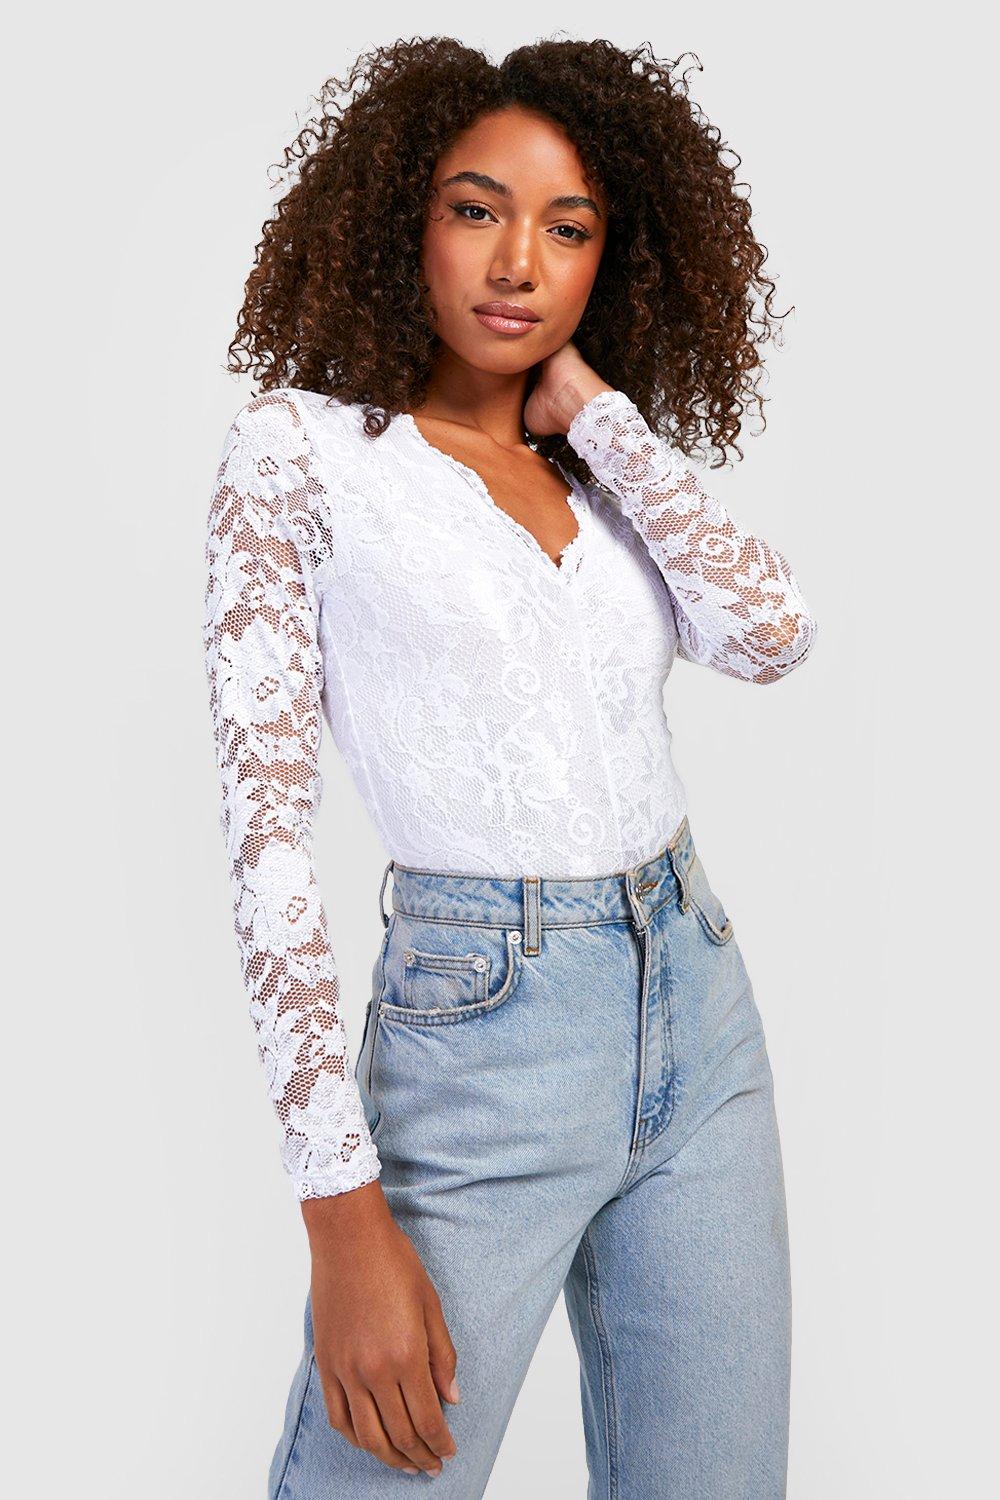 Shop Boohoo Women's Black Lace Bodysuits up to 80% Off